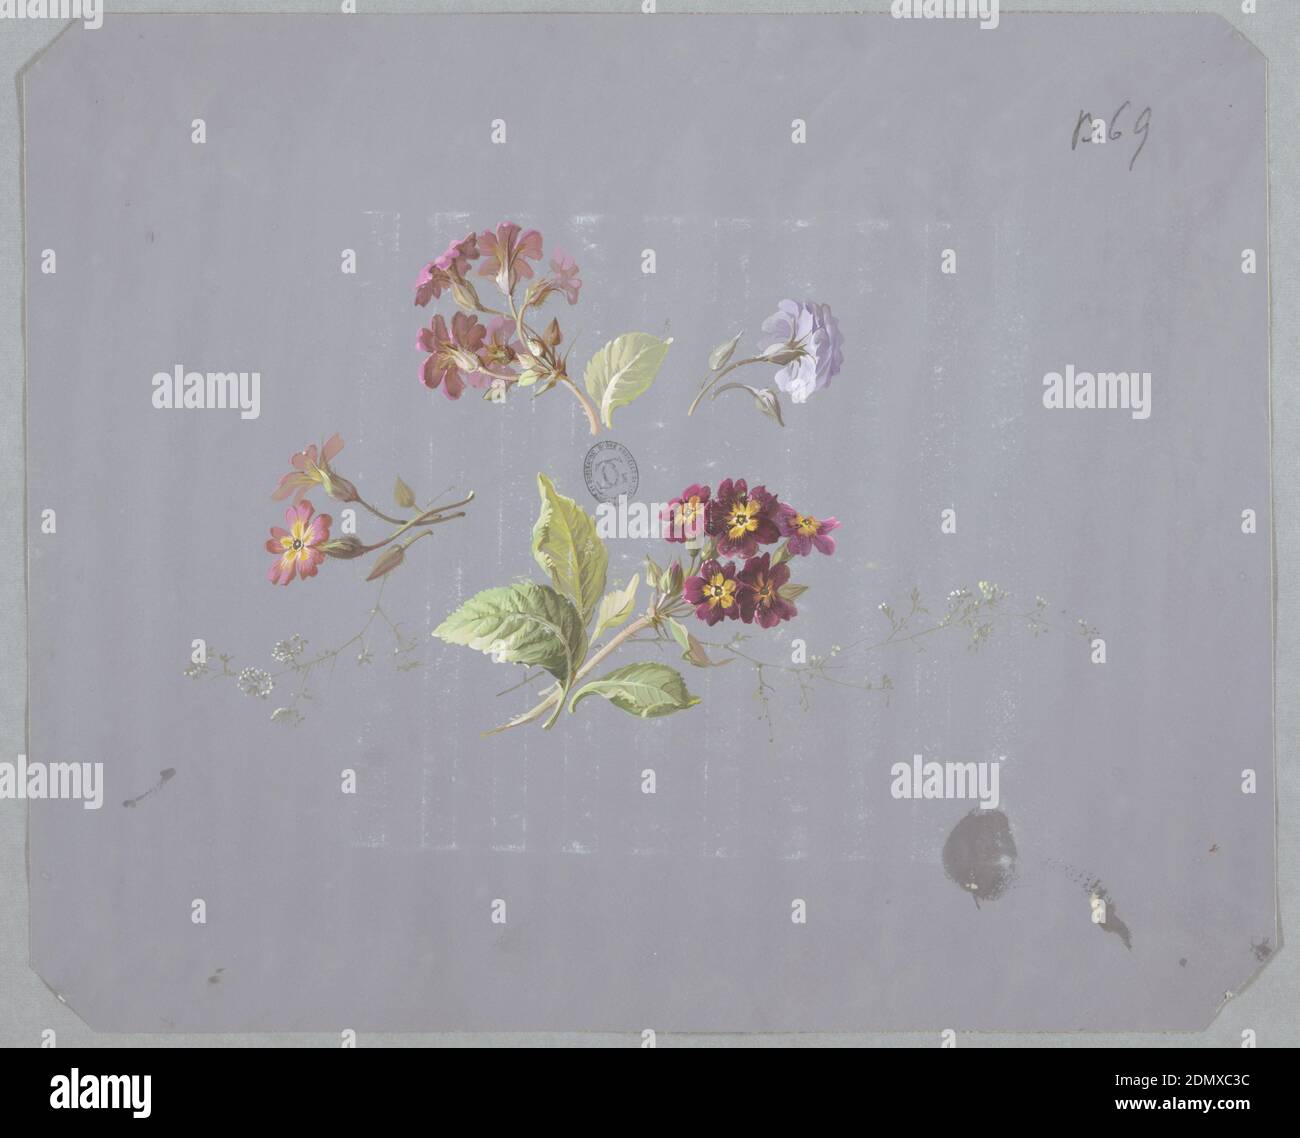 Design for Wallpaper and Textiles: Flowers, Brush and gouache on blue paper, Four clusters of flowers and foliage in various colors and sizes at center of page on gray ground. Clockwise from top: pink cluster of flowers and foliage facing away from viewer and to left, purple flower with foliage facing away from viewer and to right, cluster of maroon and yellow flowers and foliage facing towards viewer and to right, pink and yellow pair of flowers with foliage facing left., France, 19th century, wallpaper designs, Drawing Stock Photo